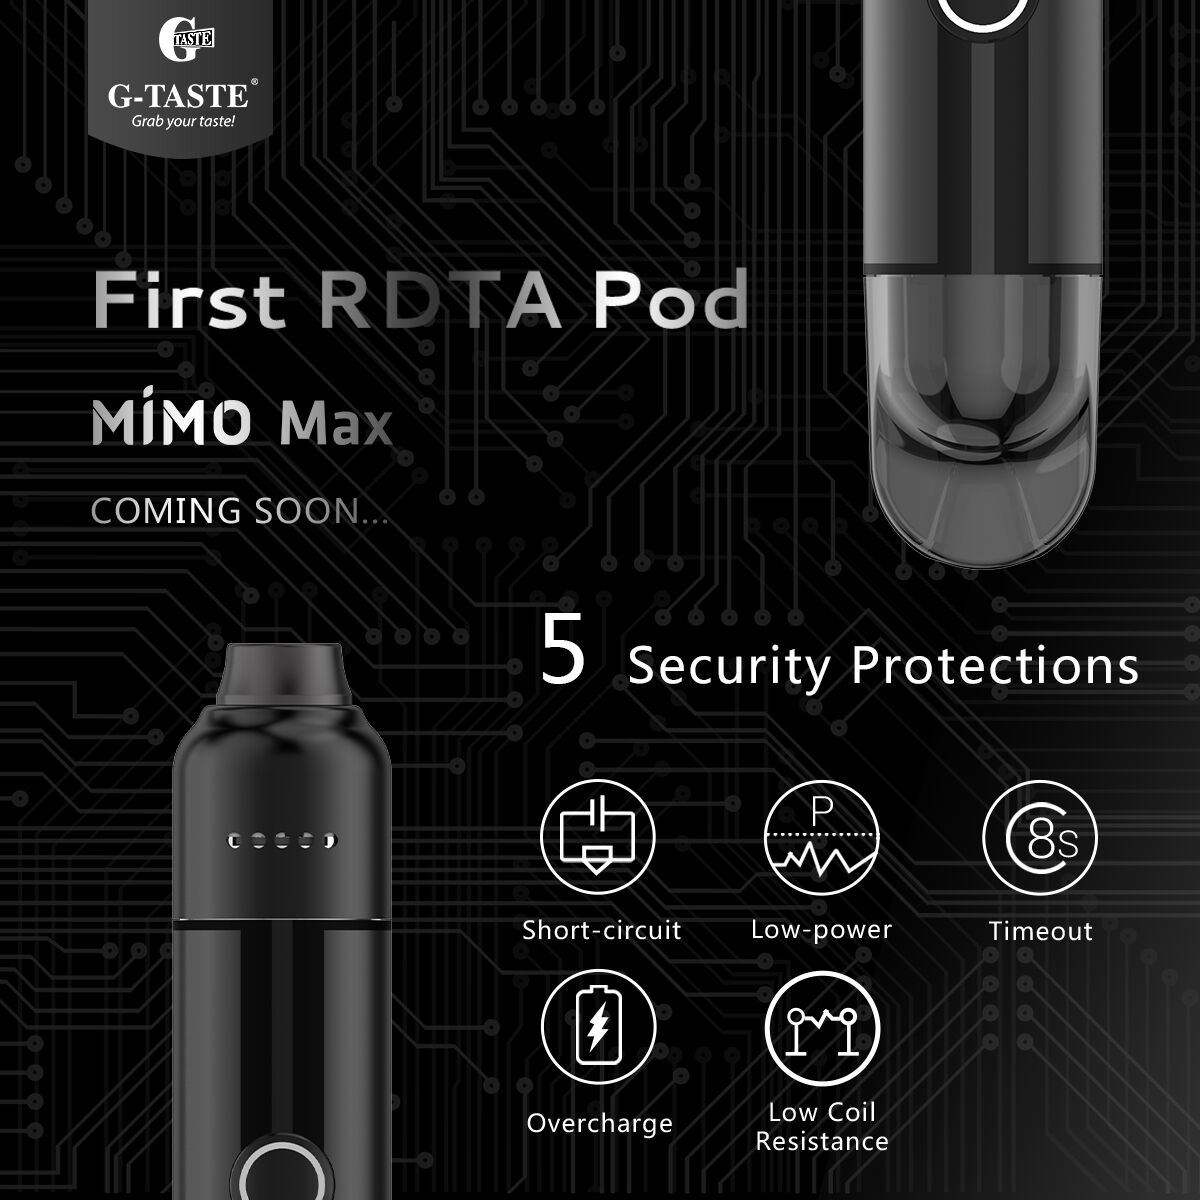 G Taste Multiple Protections For The Mimo Max Which Can Avoid Potential Risks And Provide You A Safer Vaping Trip Gtaste Mimokit Gtastemimo Vapegiveaway Gtasteofficial Newlikegirl Vapehooligans Vape Vapers